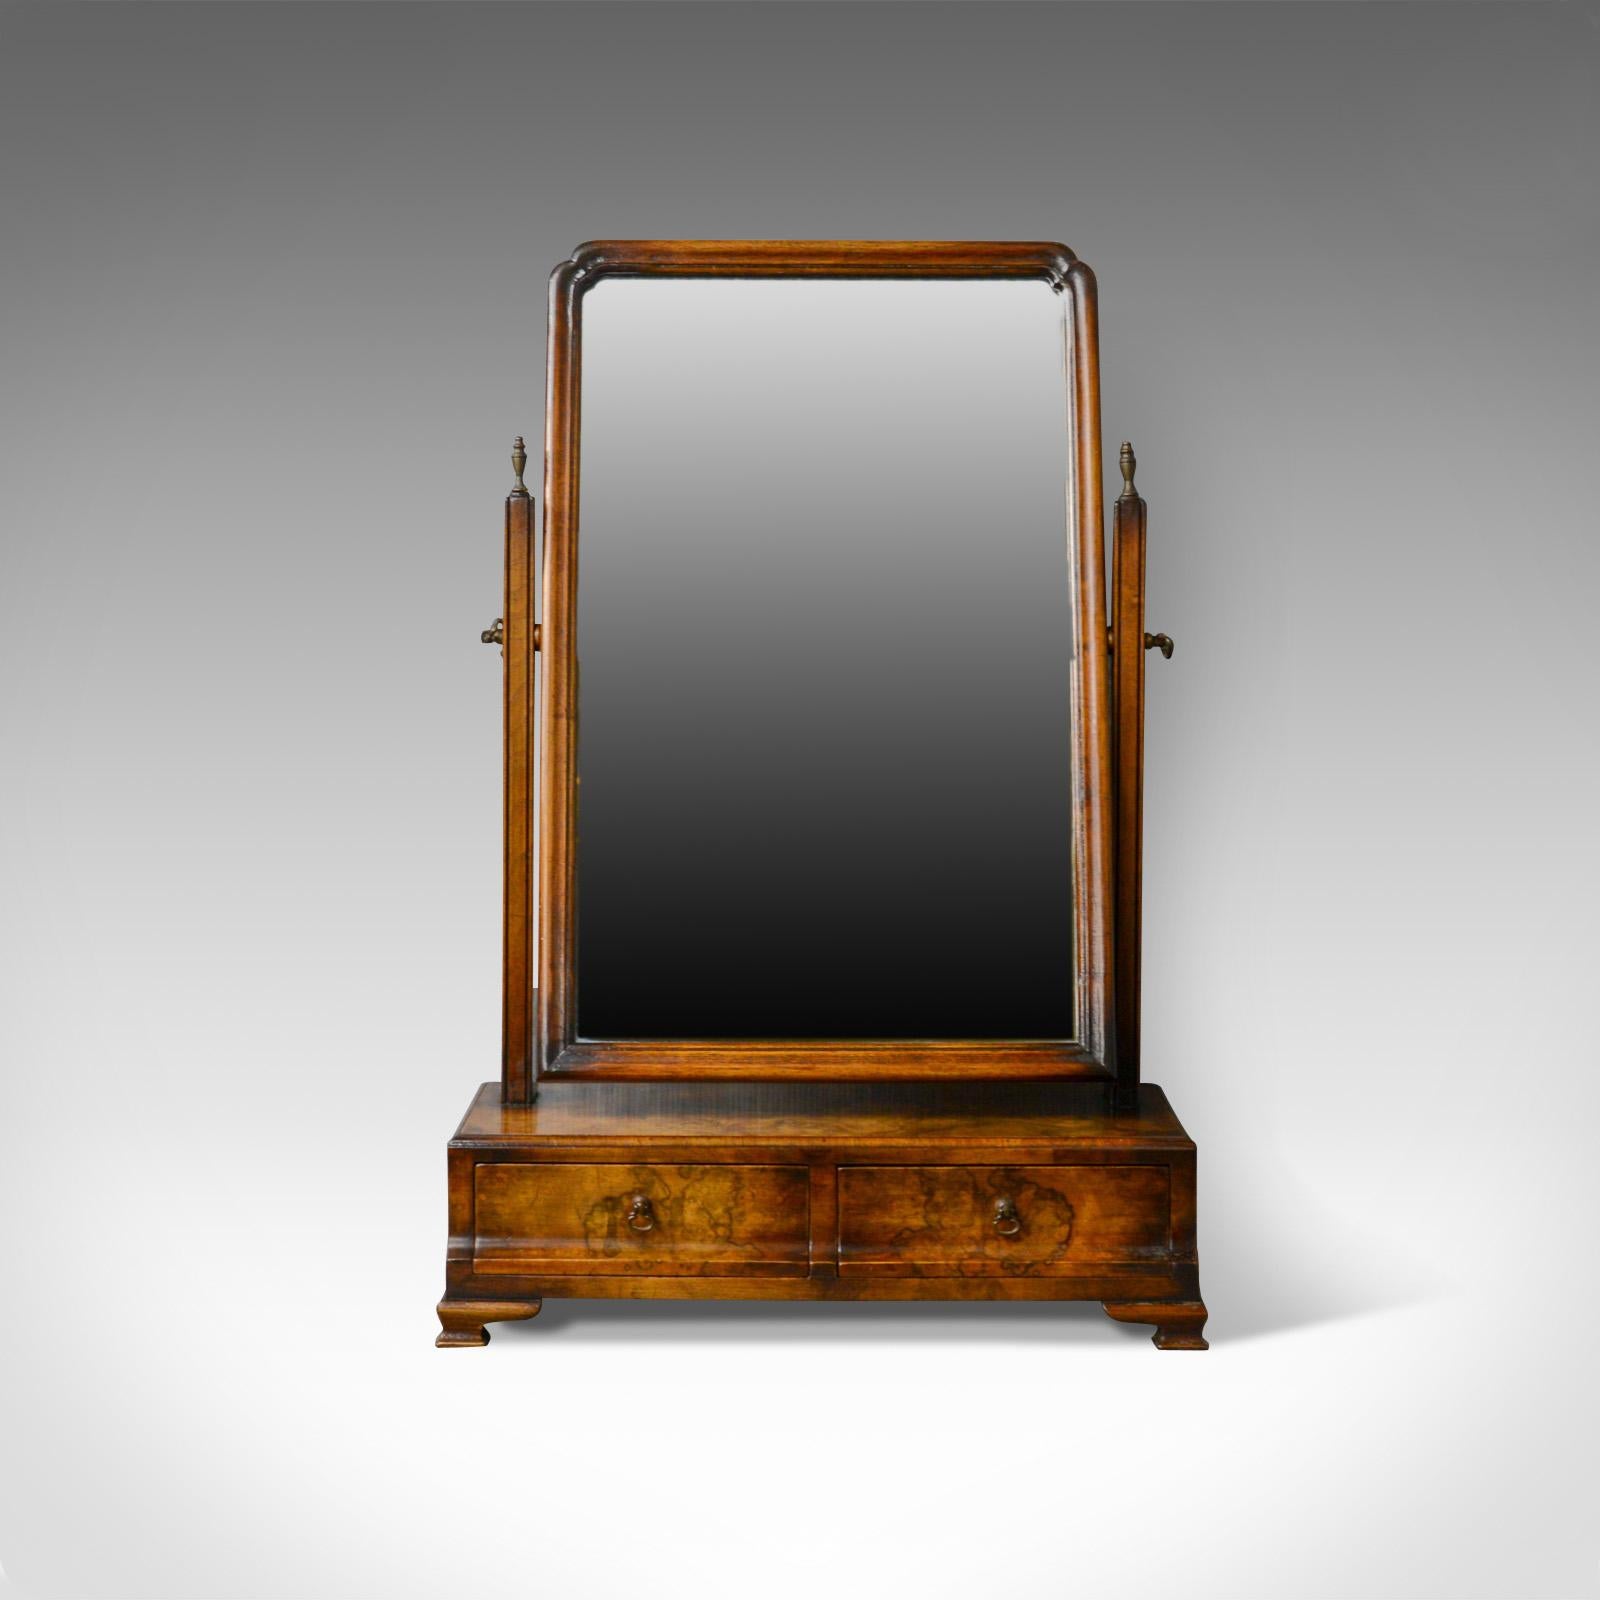 This is an antique dressing table mirror in burr walnut. An English, Georgian revival, vanity, toilet mirror dating to the early 19th century, circa 1910.

Mid-sized vanity mirror in the Georgian revival taste
Fine burr walnut finish displaying